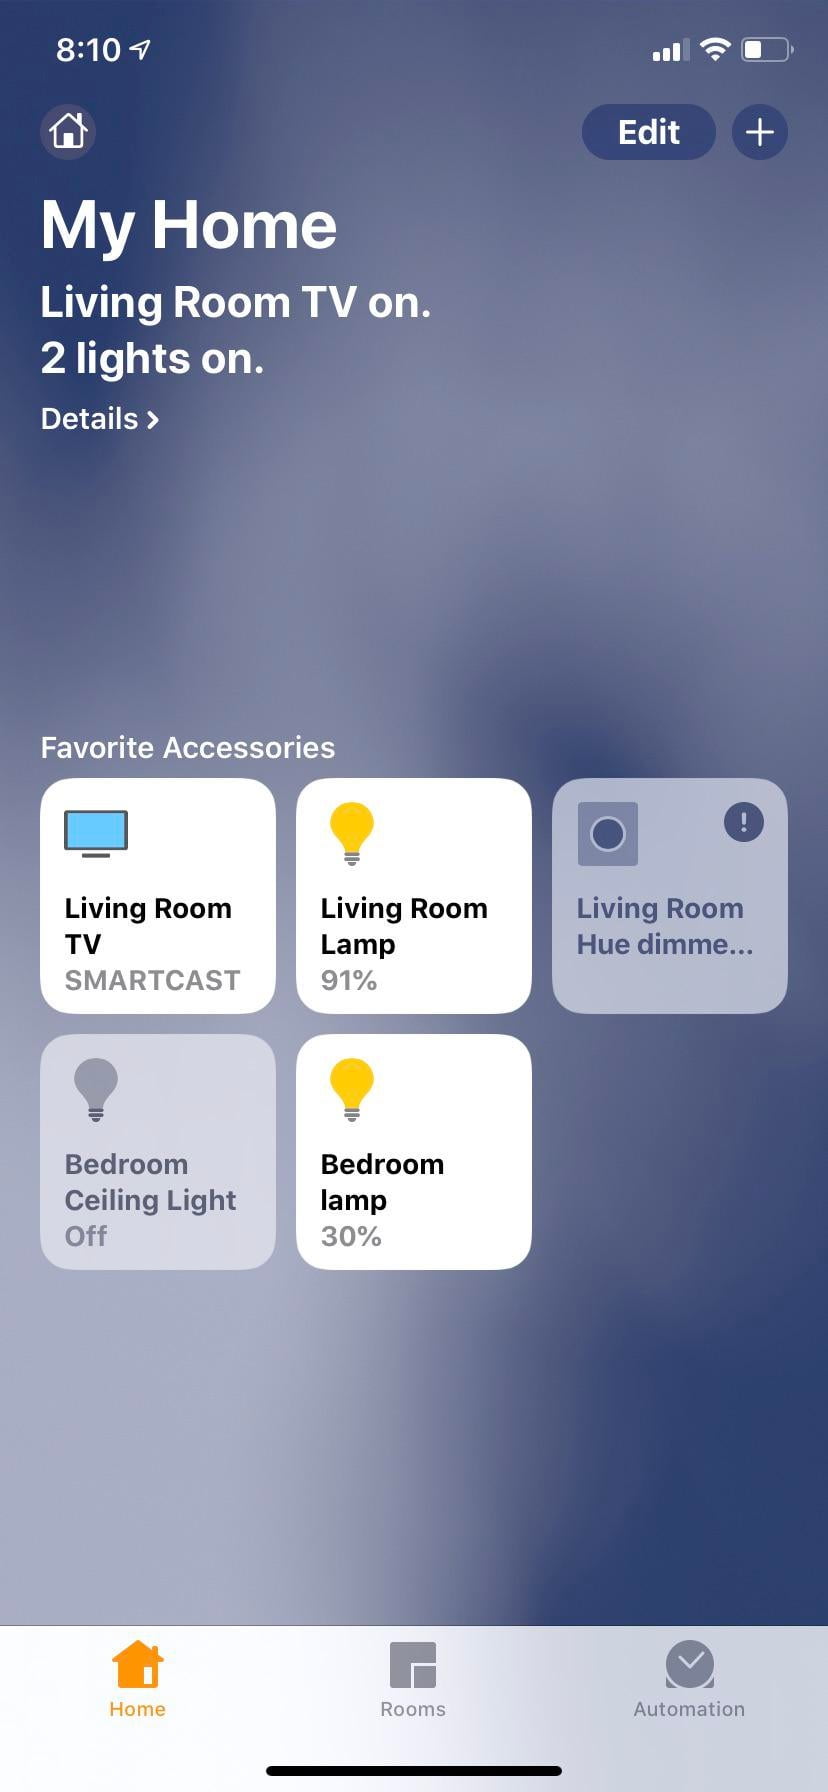 Lots of smart home deals now Almost my entire configuration